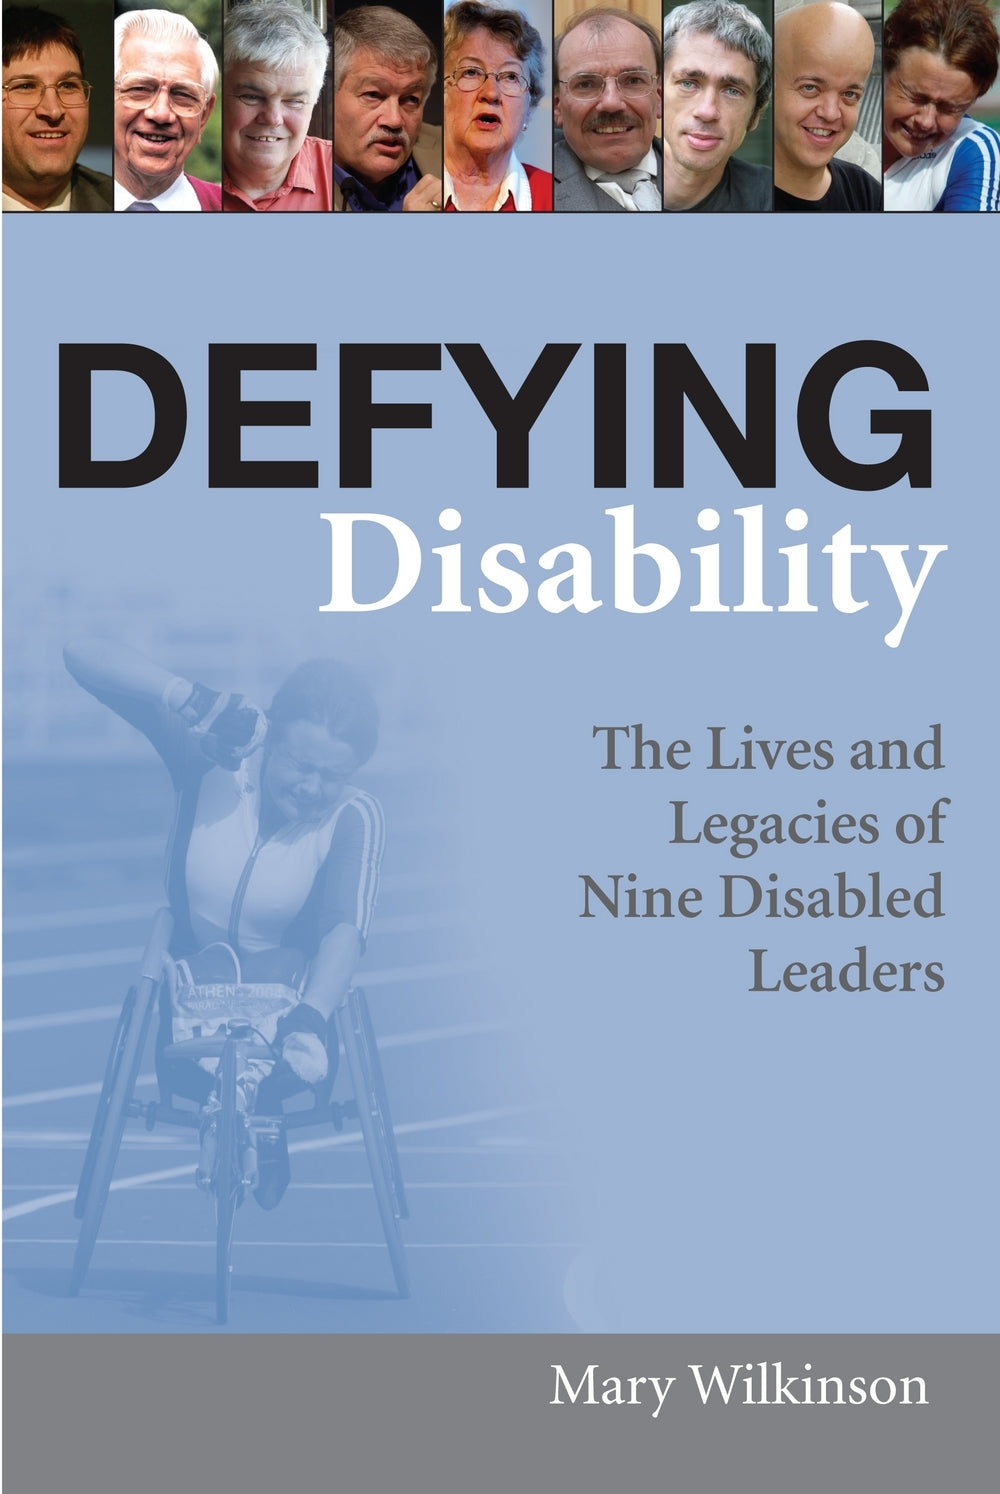 Defying Disability by Mary Wilkinson